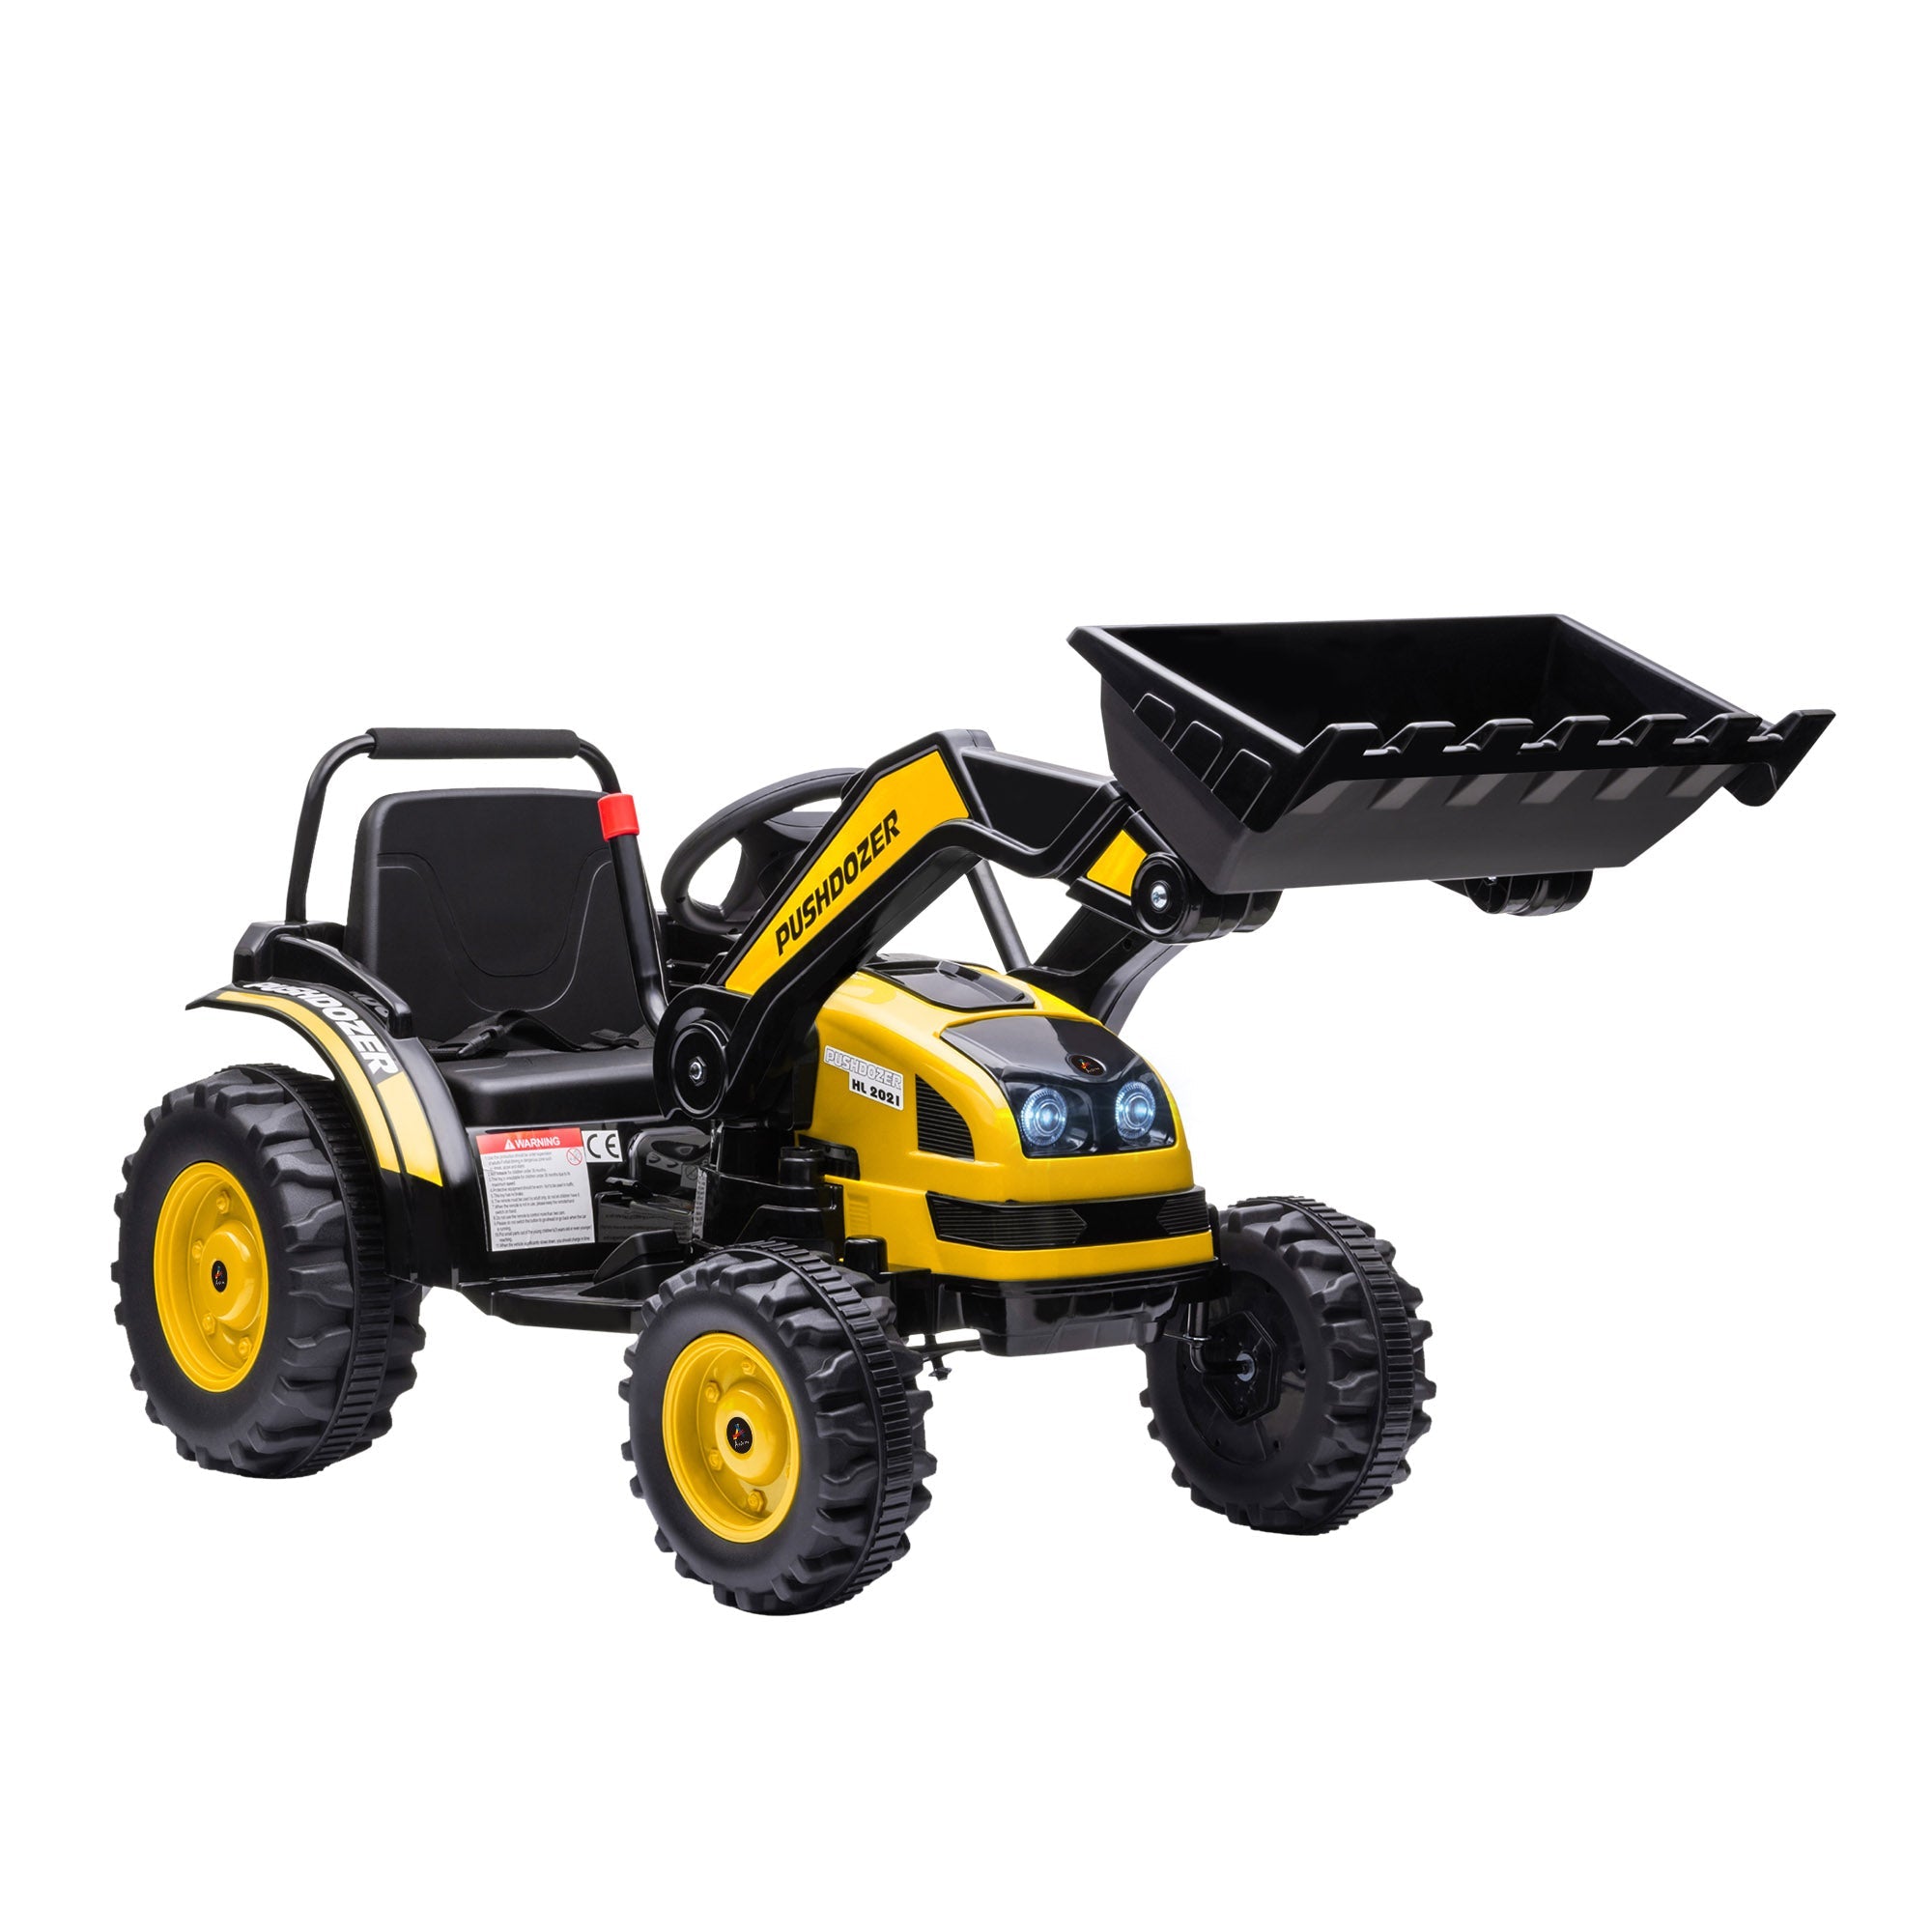 Kids Digger Ride On Excavator 6V Battery Powered Construction Tractor Music Headlight Moving Forward Backward Gear for 3-5 years old Yellow-0